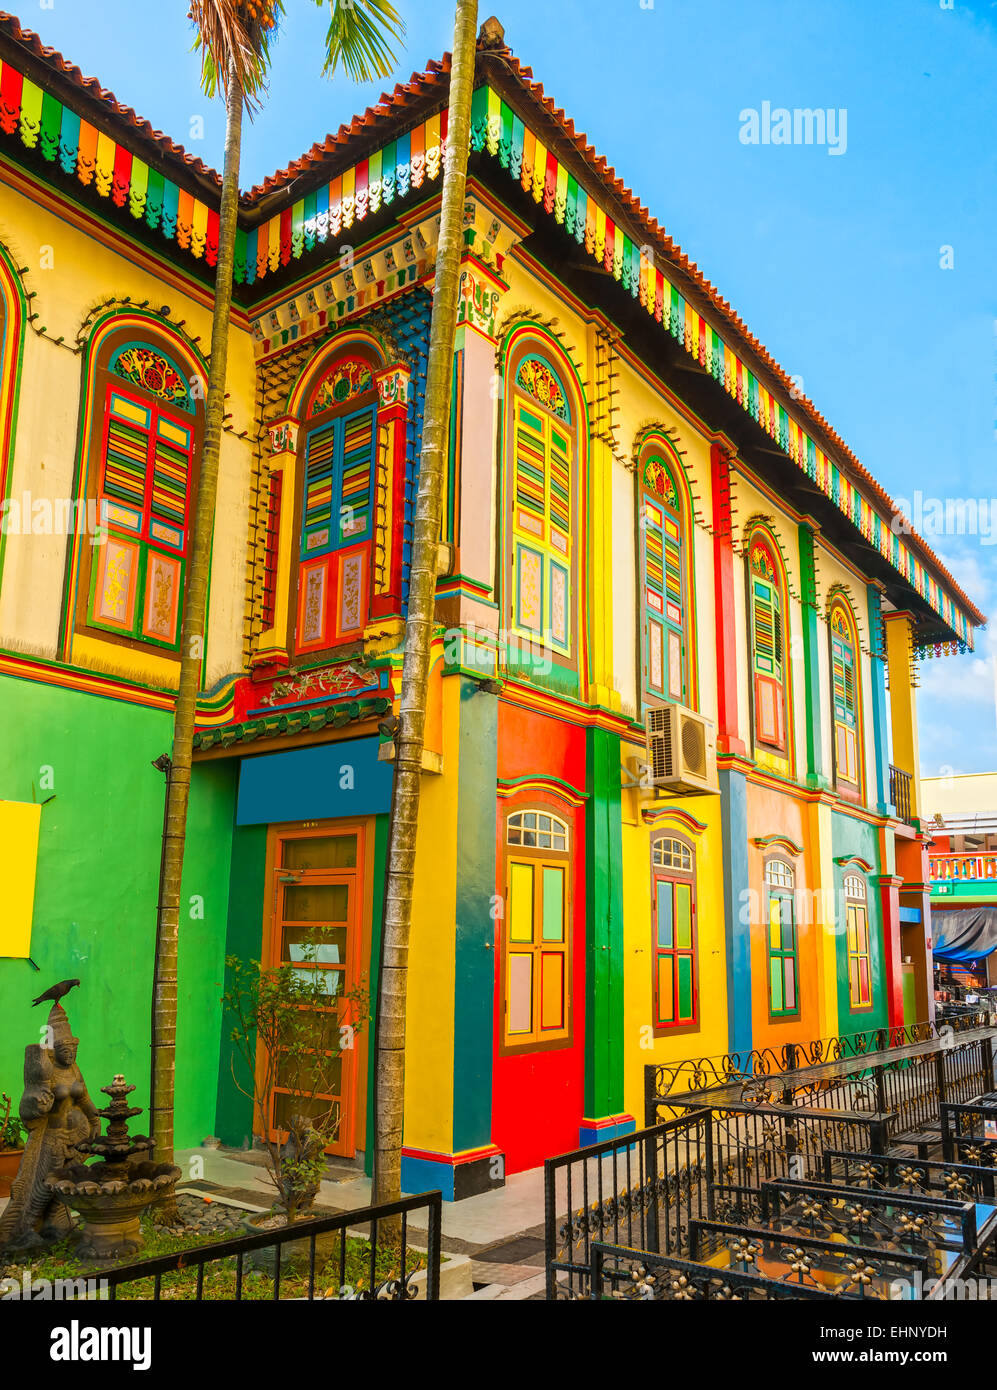 Colorful facade of building in Little India, Singapore Stock Photo